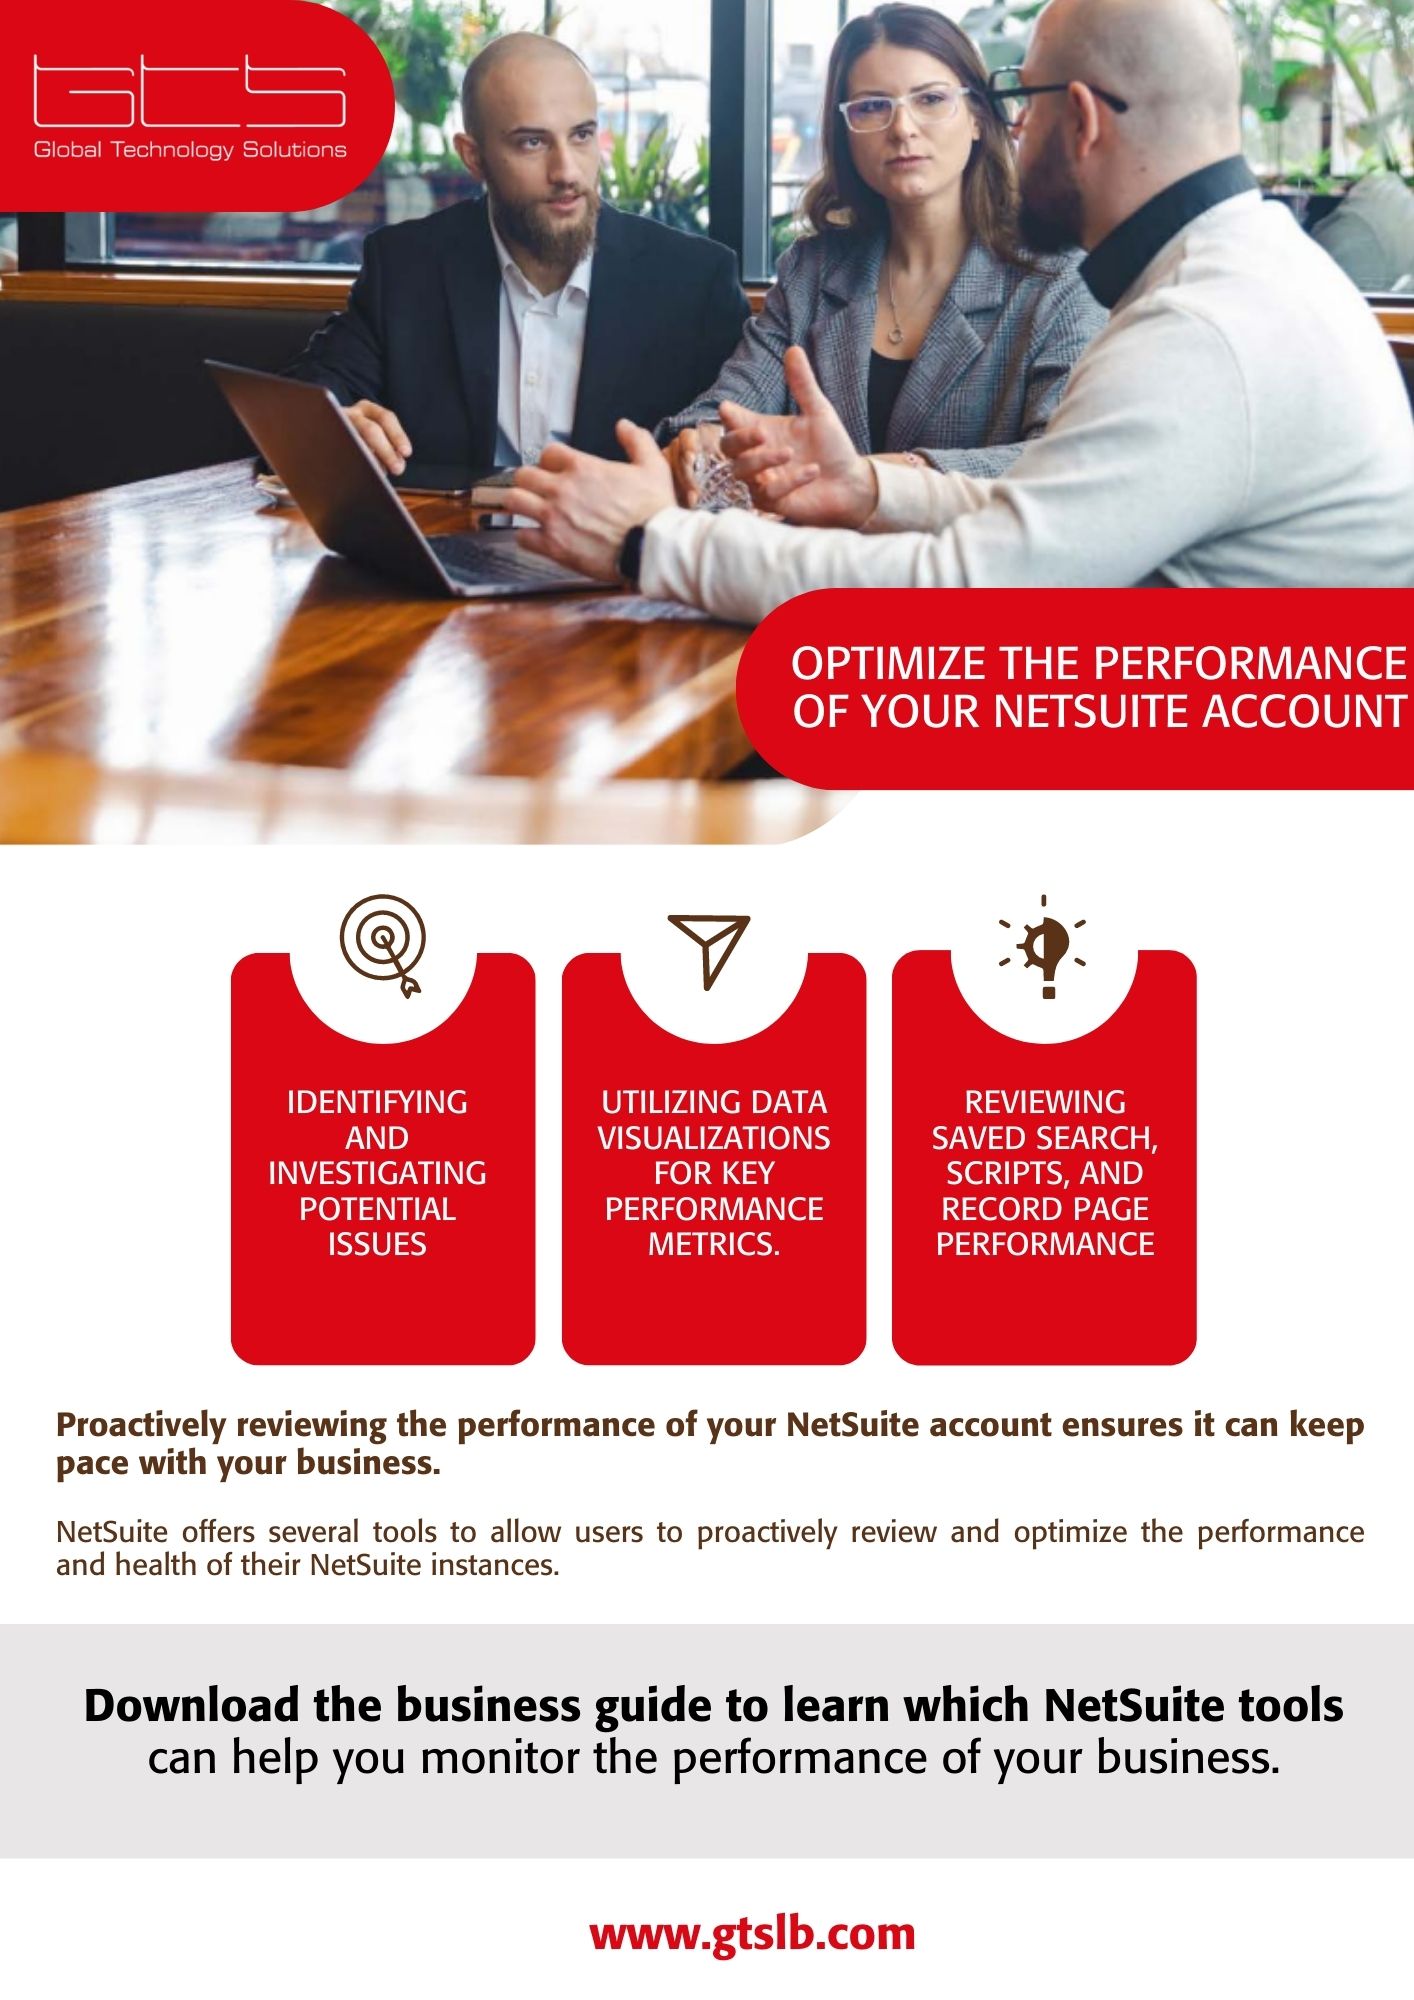 6 Tools to Optimize the Performance of Your NetSuite Account